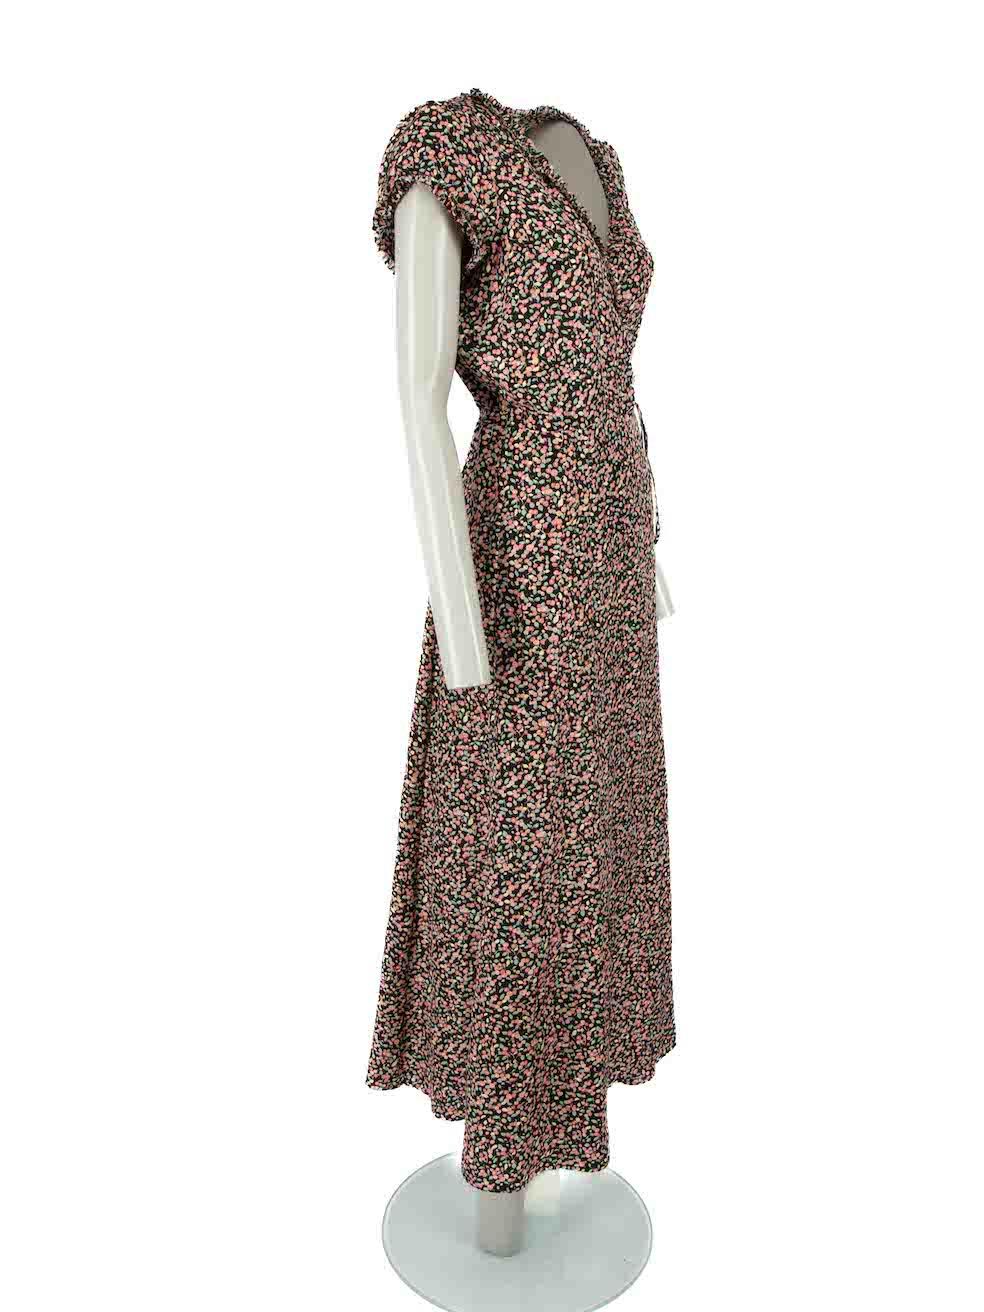 CONDITION is Very good. Hardly any visible wear to dress is evident on this used Gerard Darel designer resale item.

 Details
 Multicolour
 Silk
 Wrap dress
 Floral print
 Midi
 Short sleeves
 V-neck
 Made in Lithuania
 Composition
 100% Silk
 
